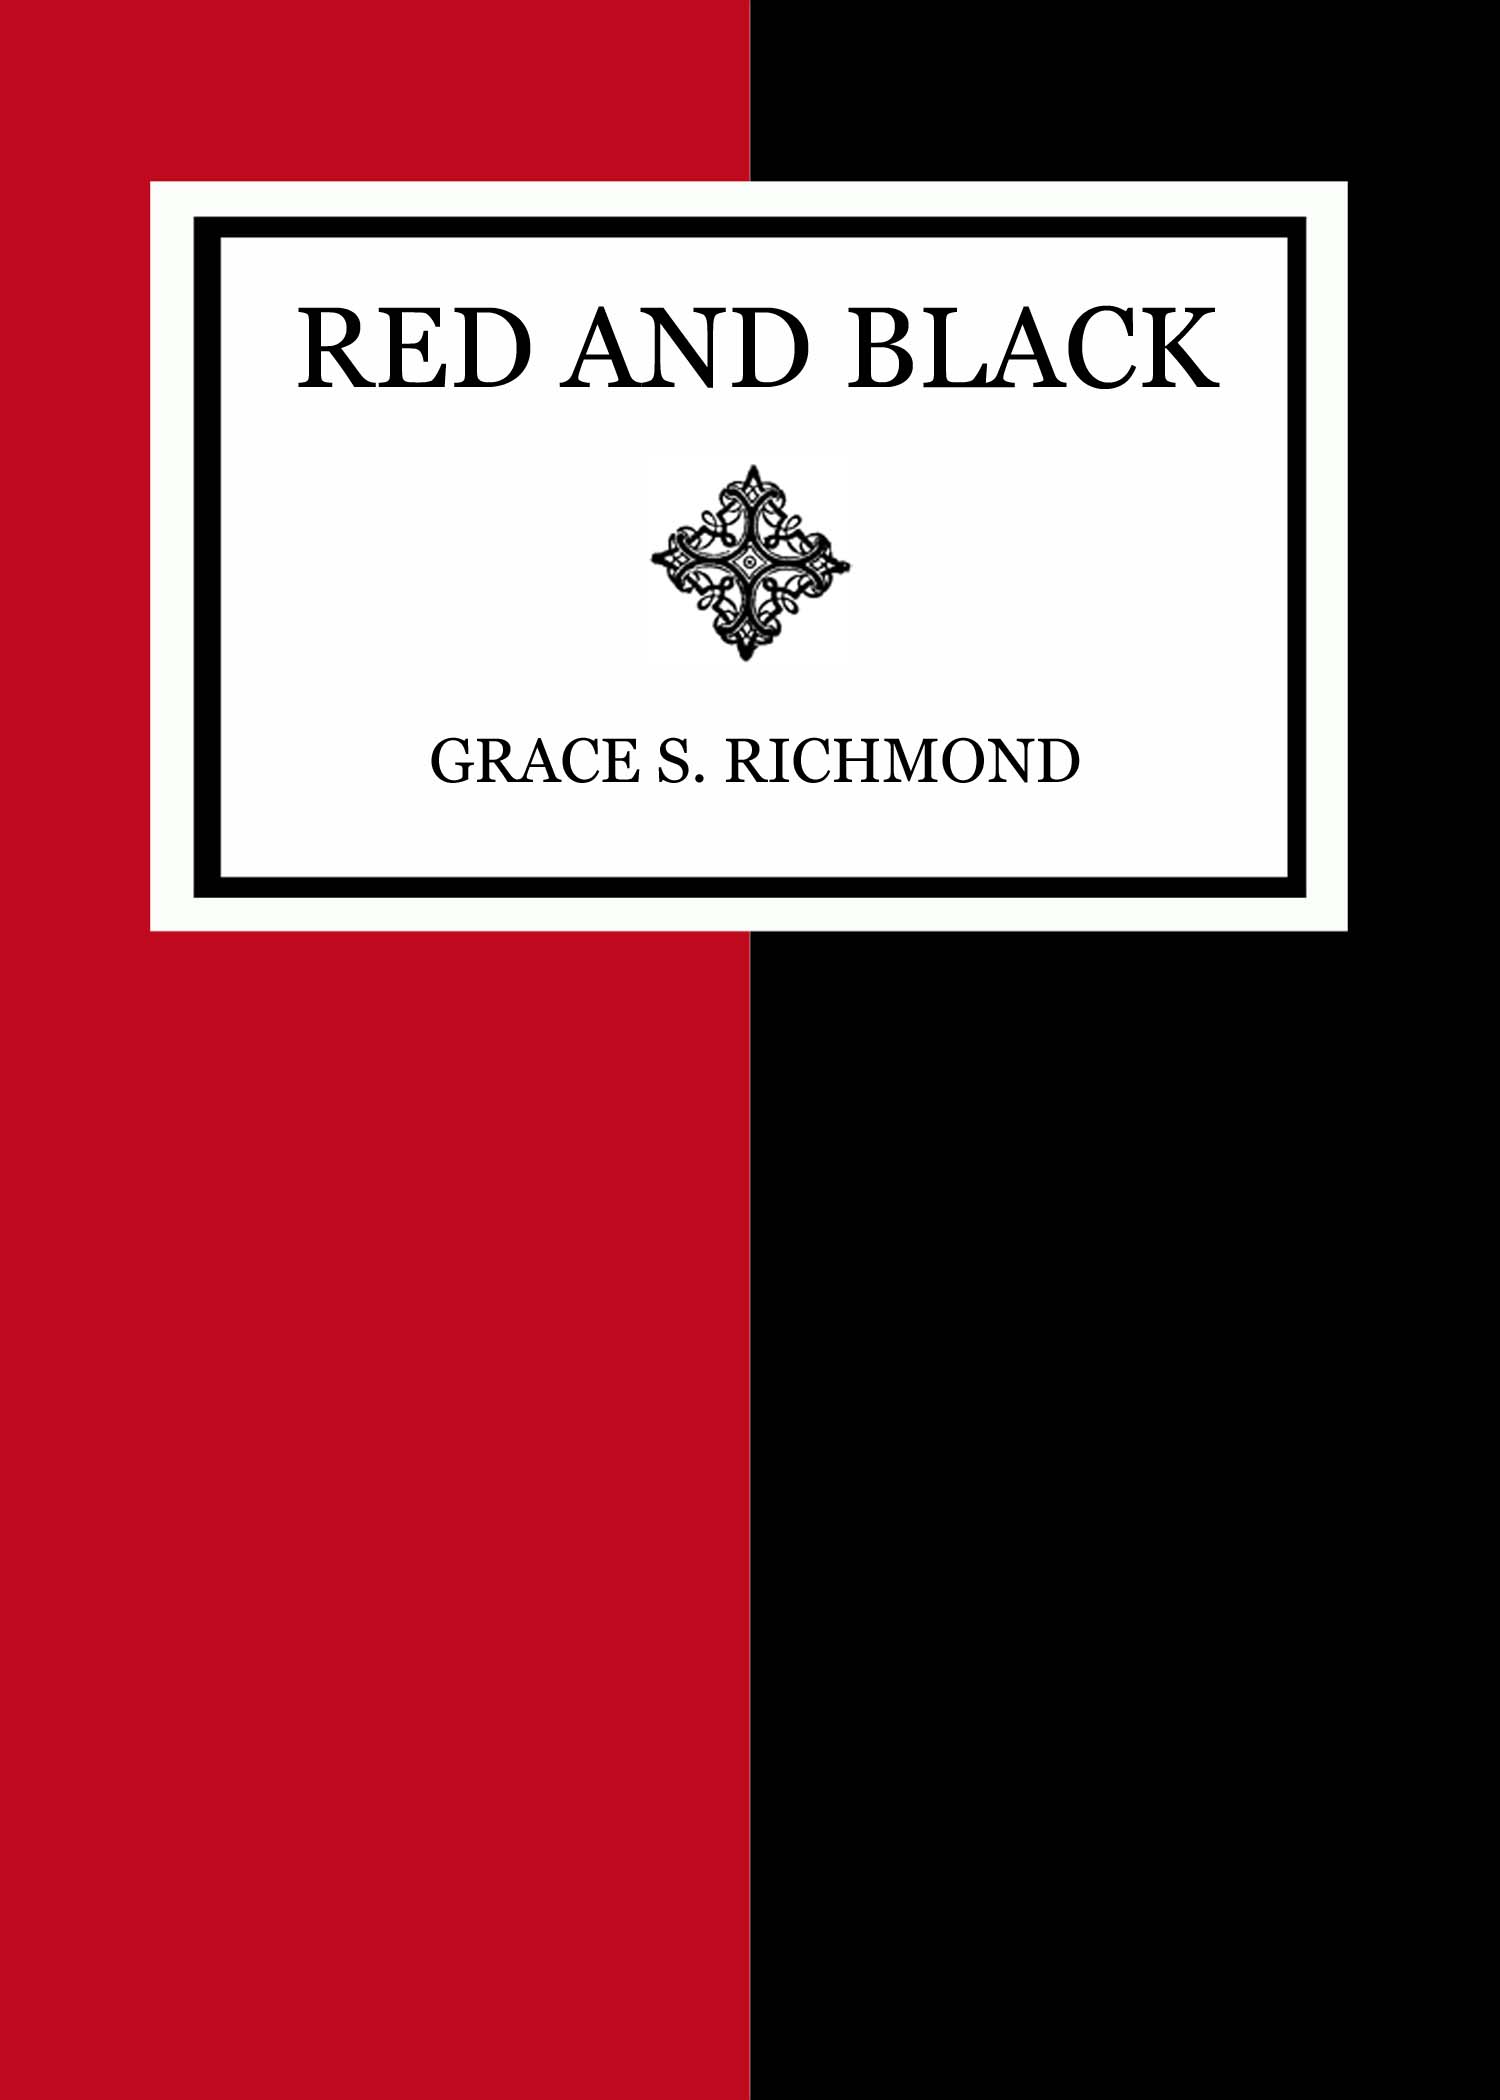 Red and Black, by Grace S